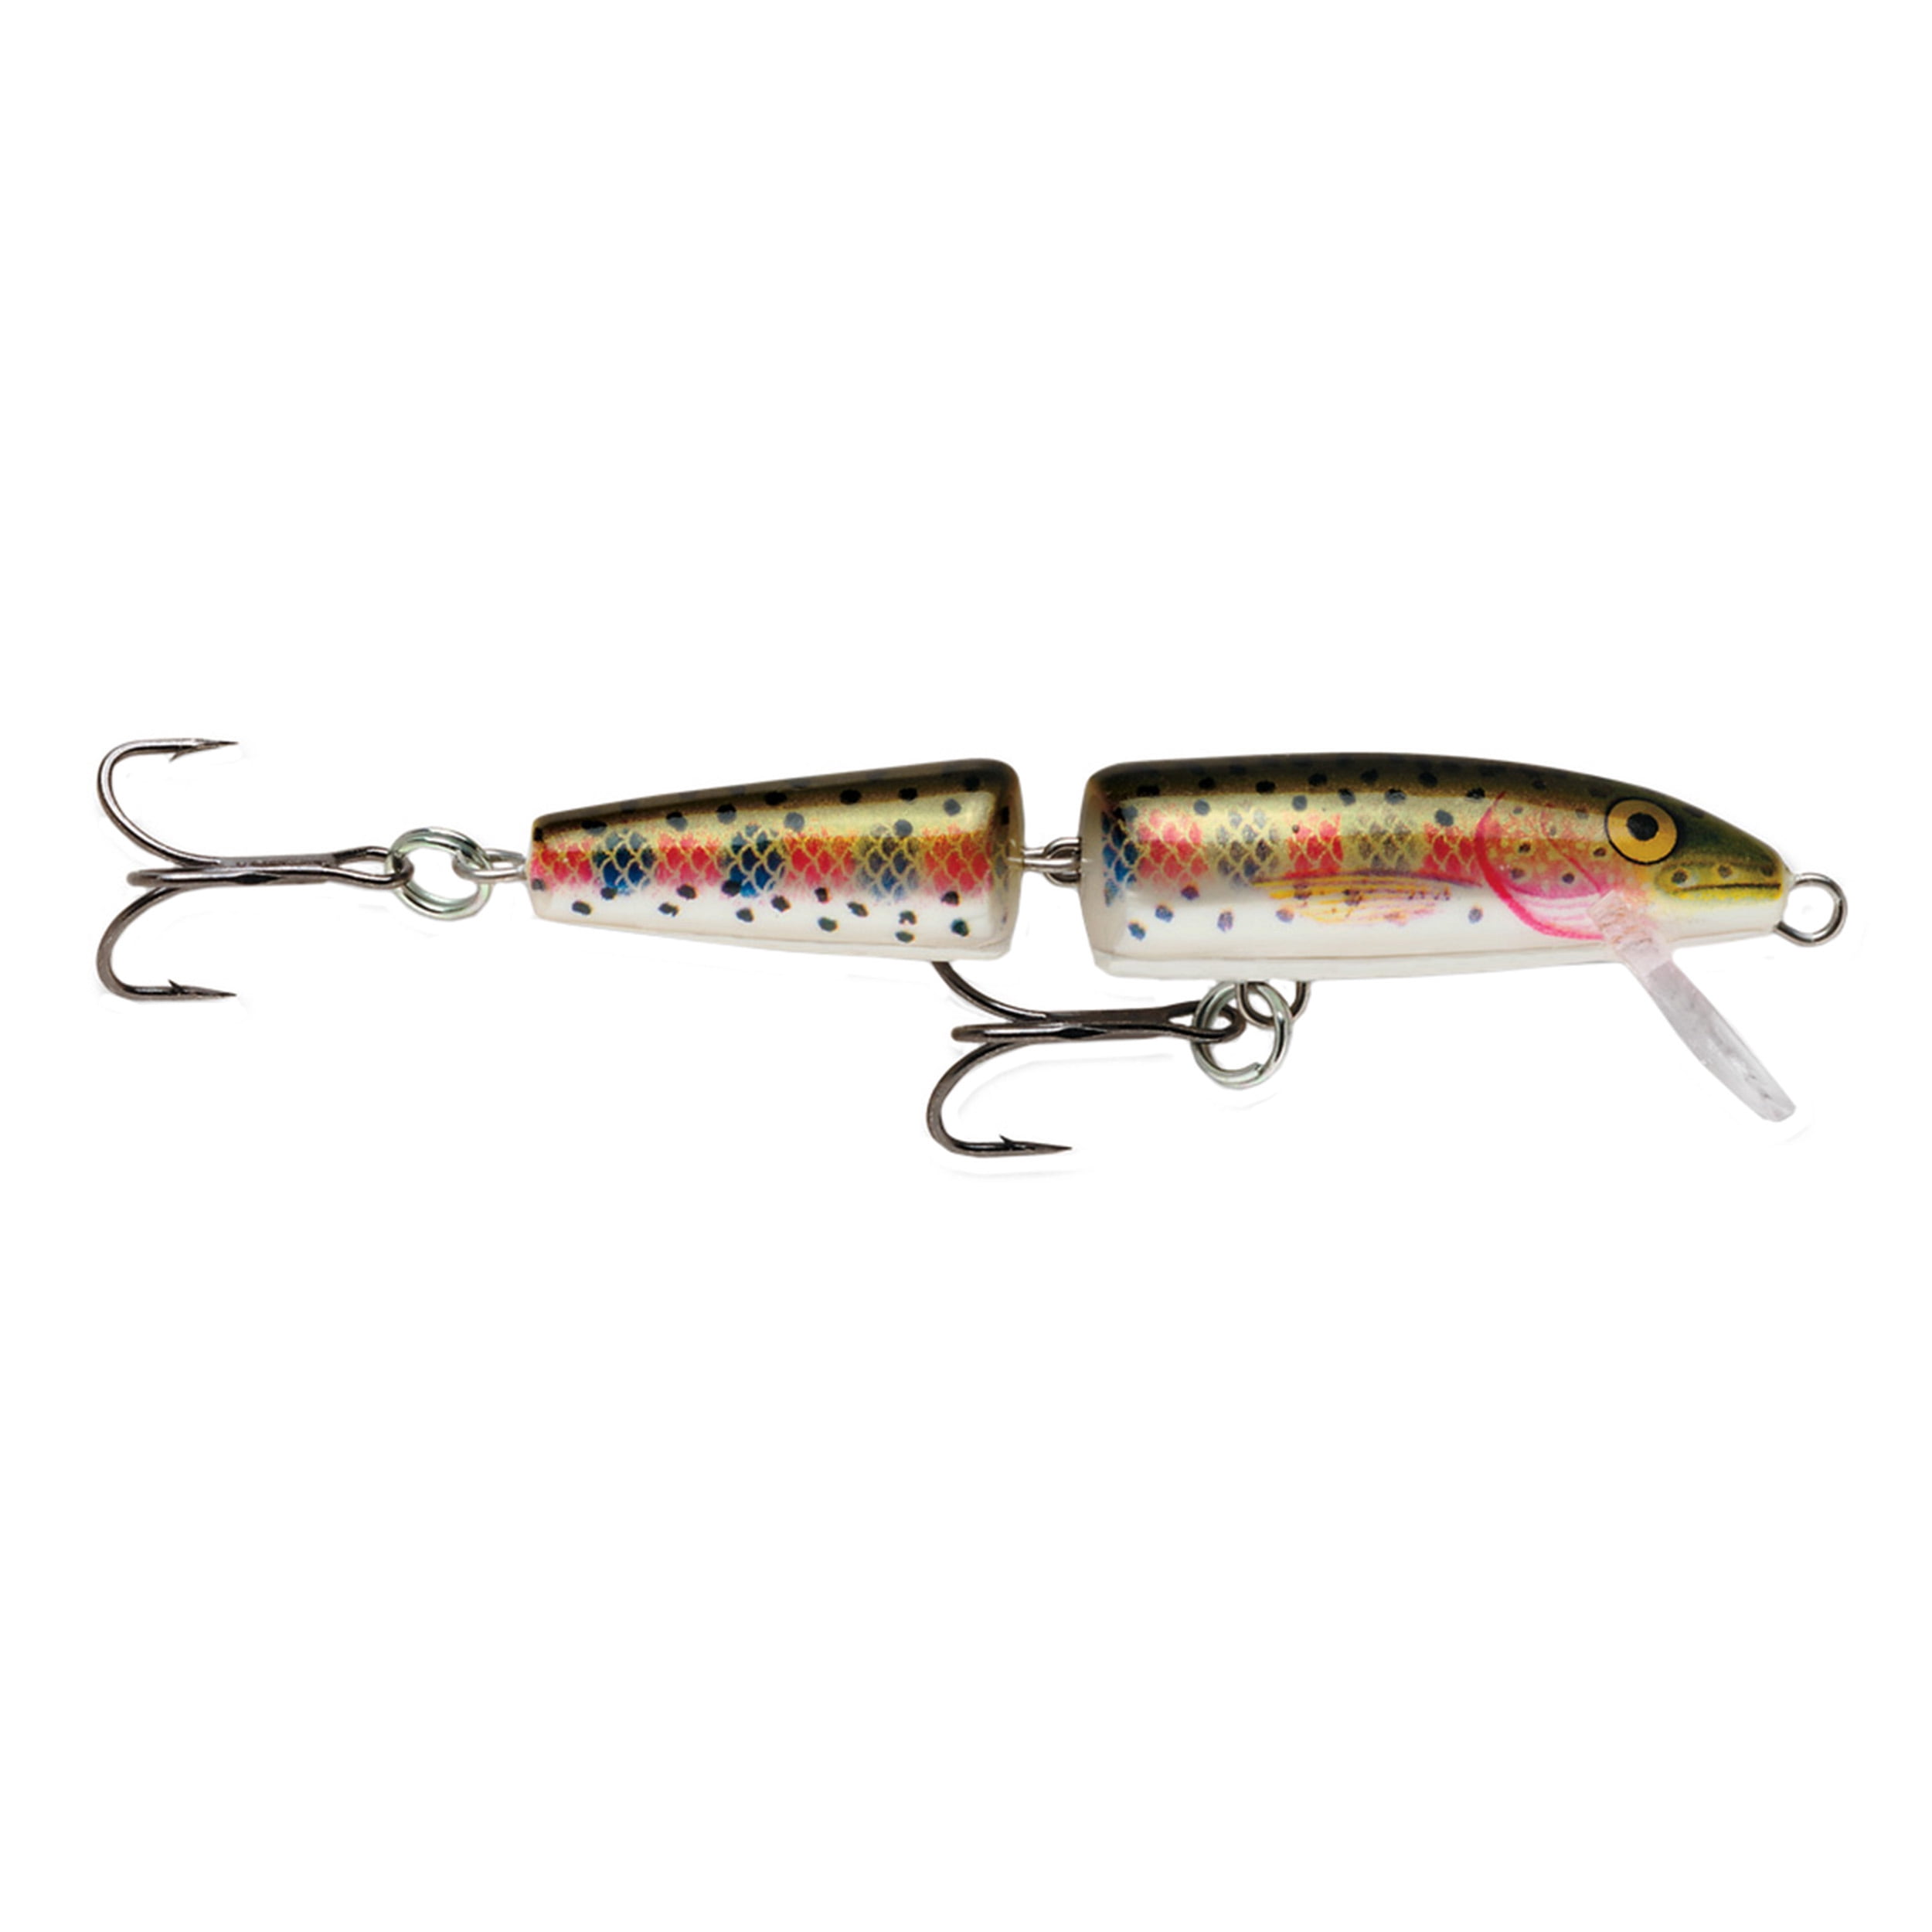 Brown Trout, Size- 2.75 Rapala Jointed 07 Fishing lure